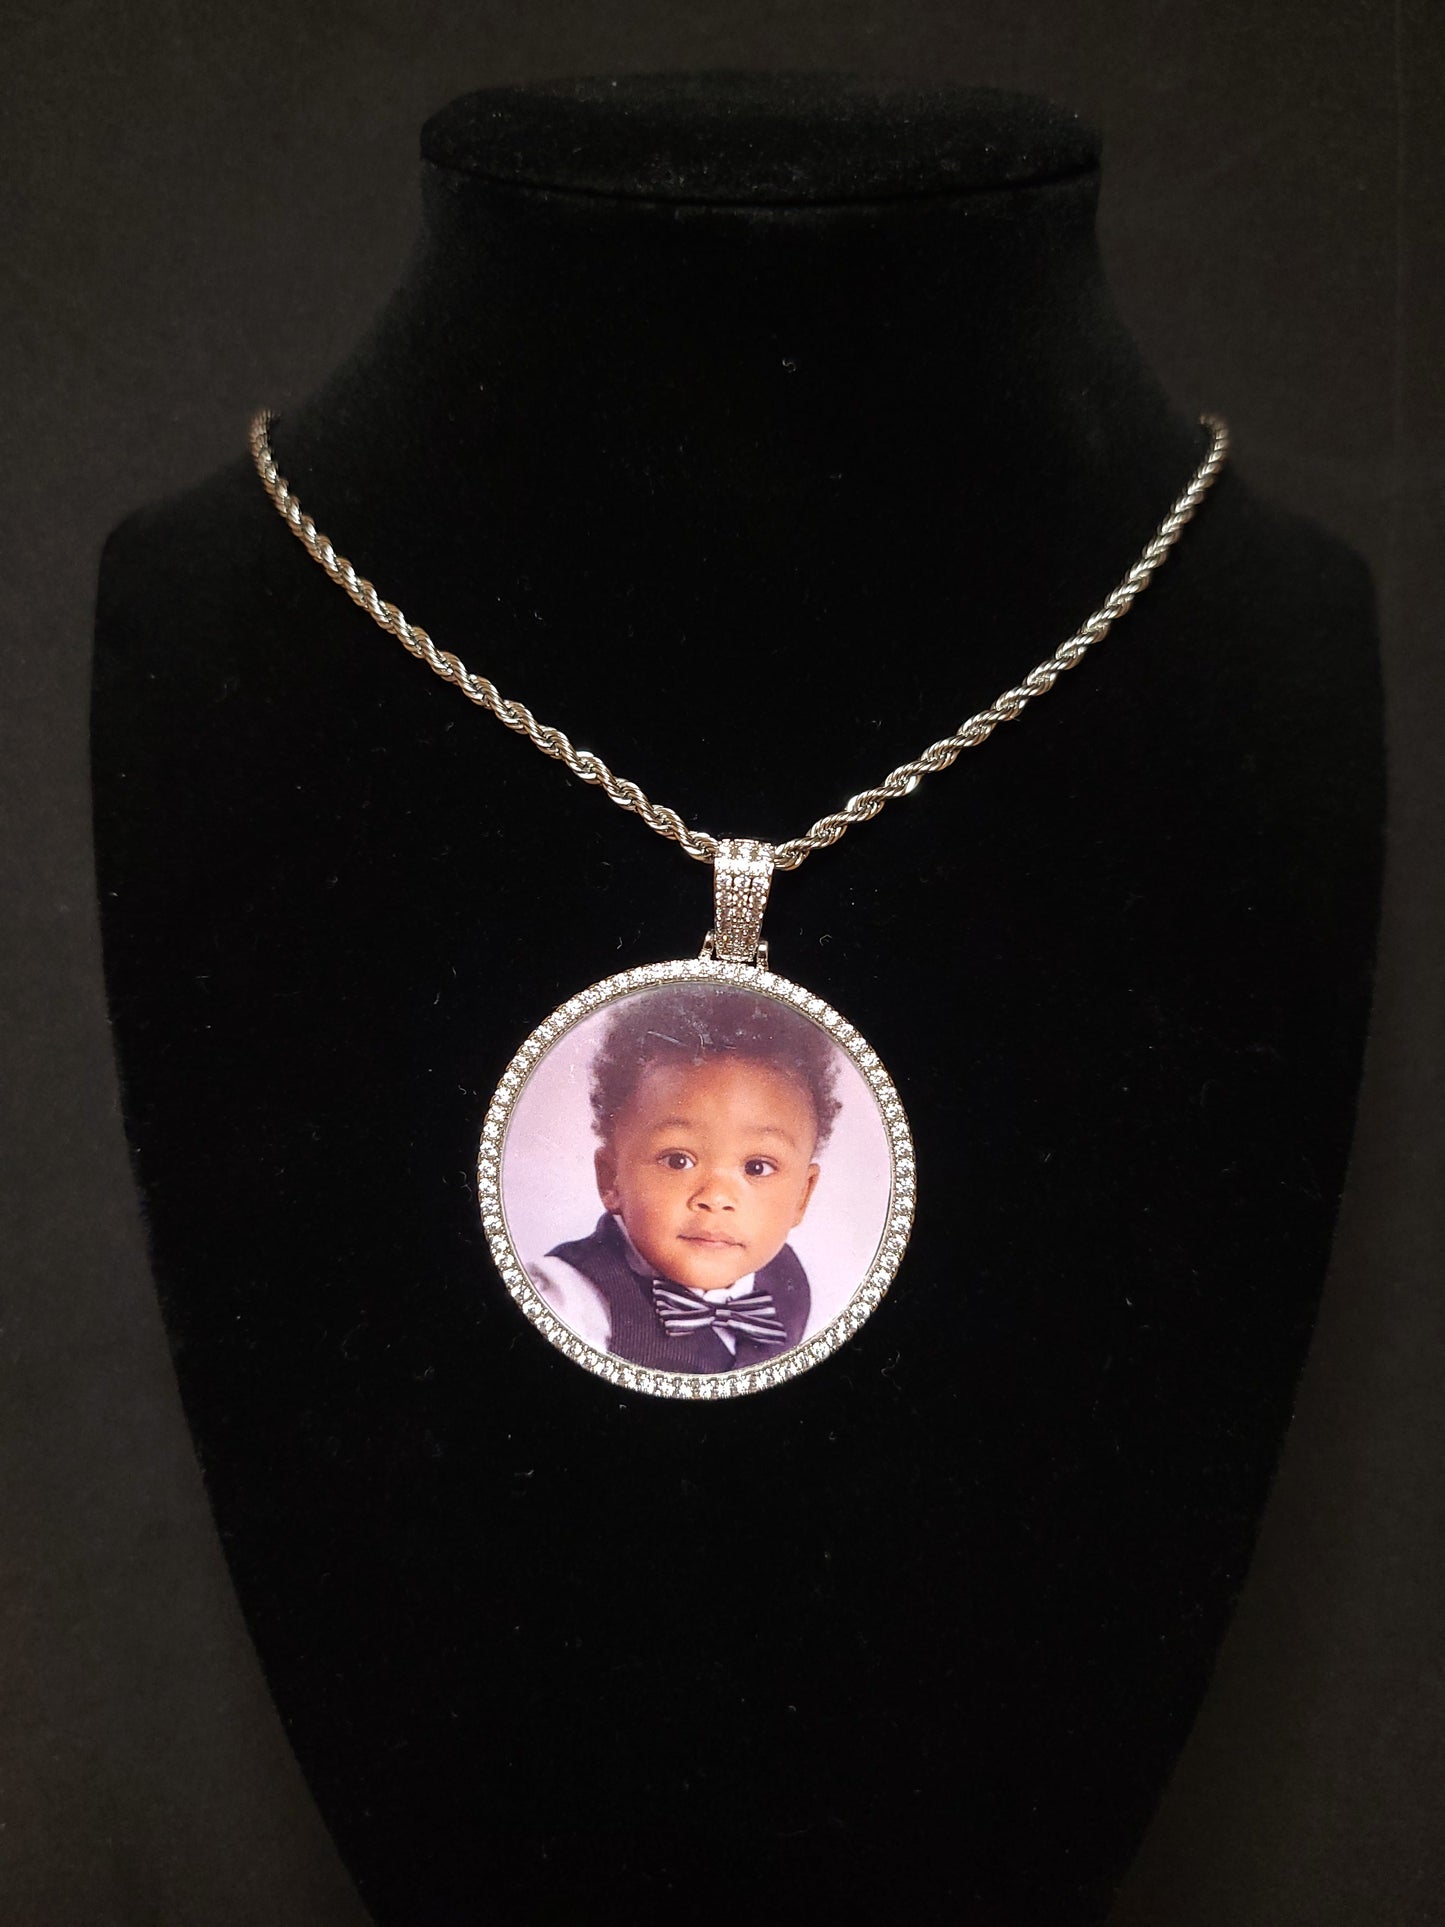 Large Custom Photo Picture Pendant Necklace - Blinged by Belle